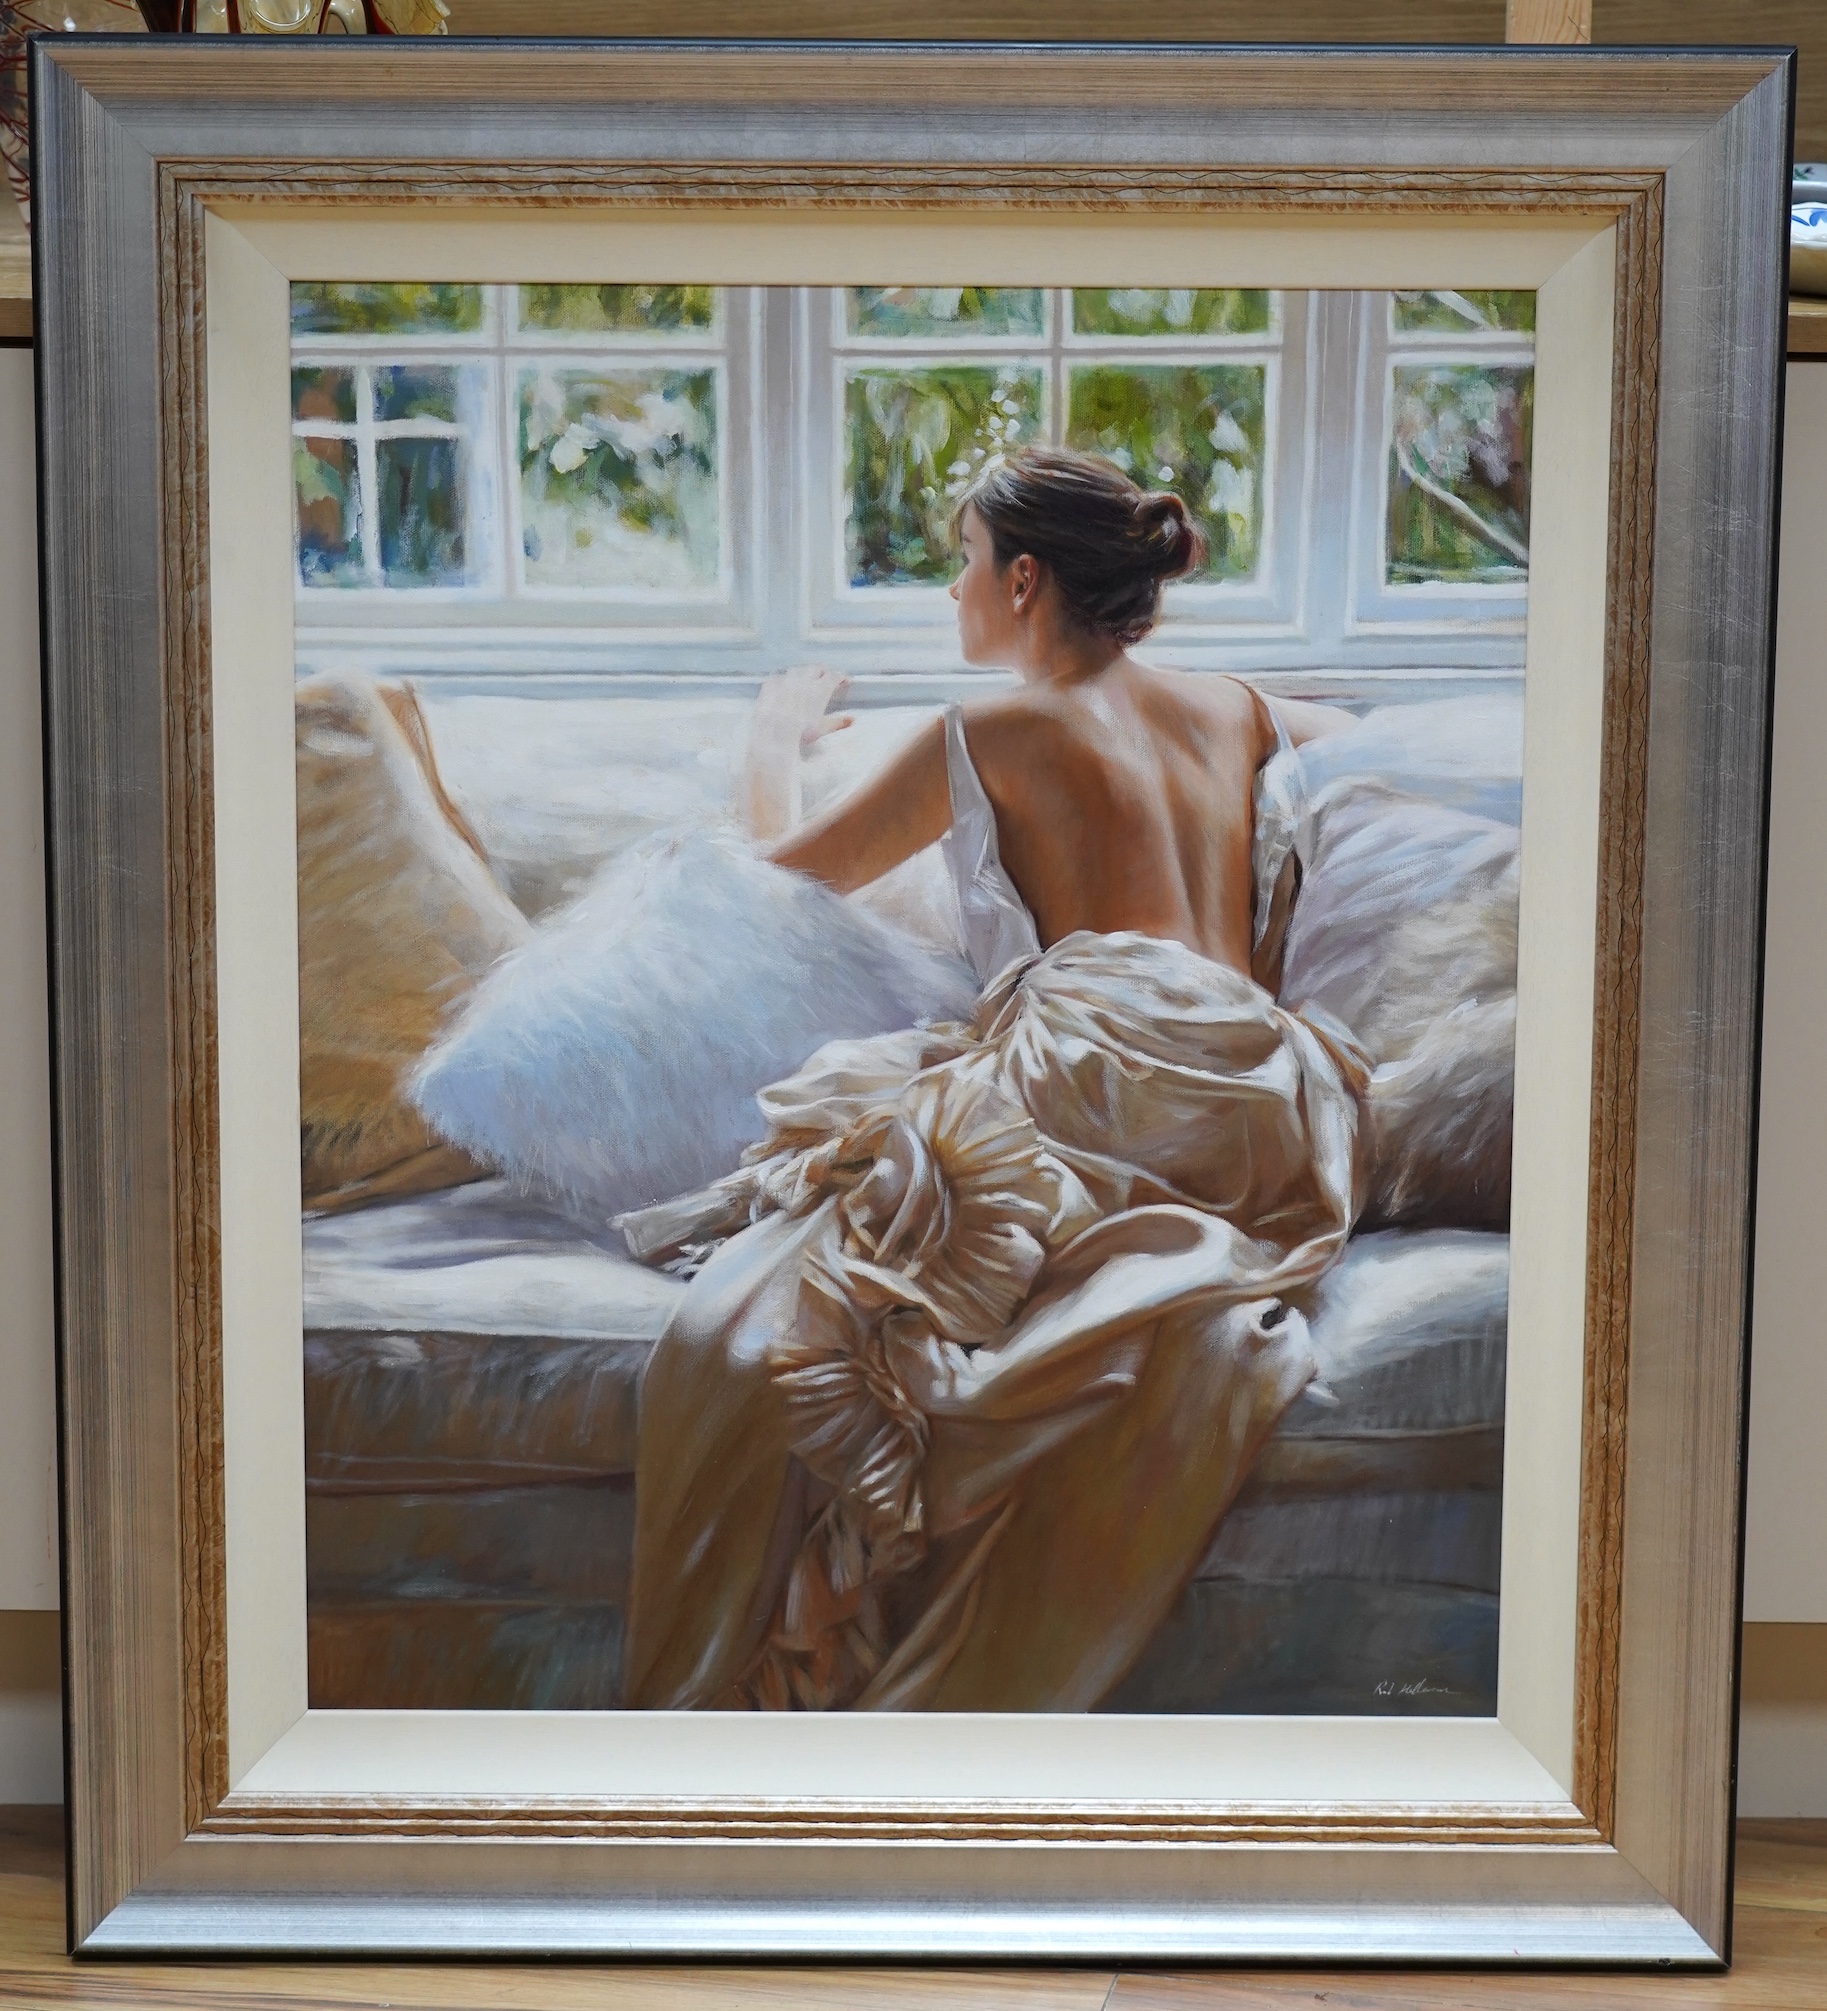 Rob Hefferan (b.1968), oil on canvas, Study of a woman before a window, signed, 72 x 60cm